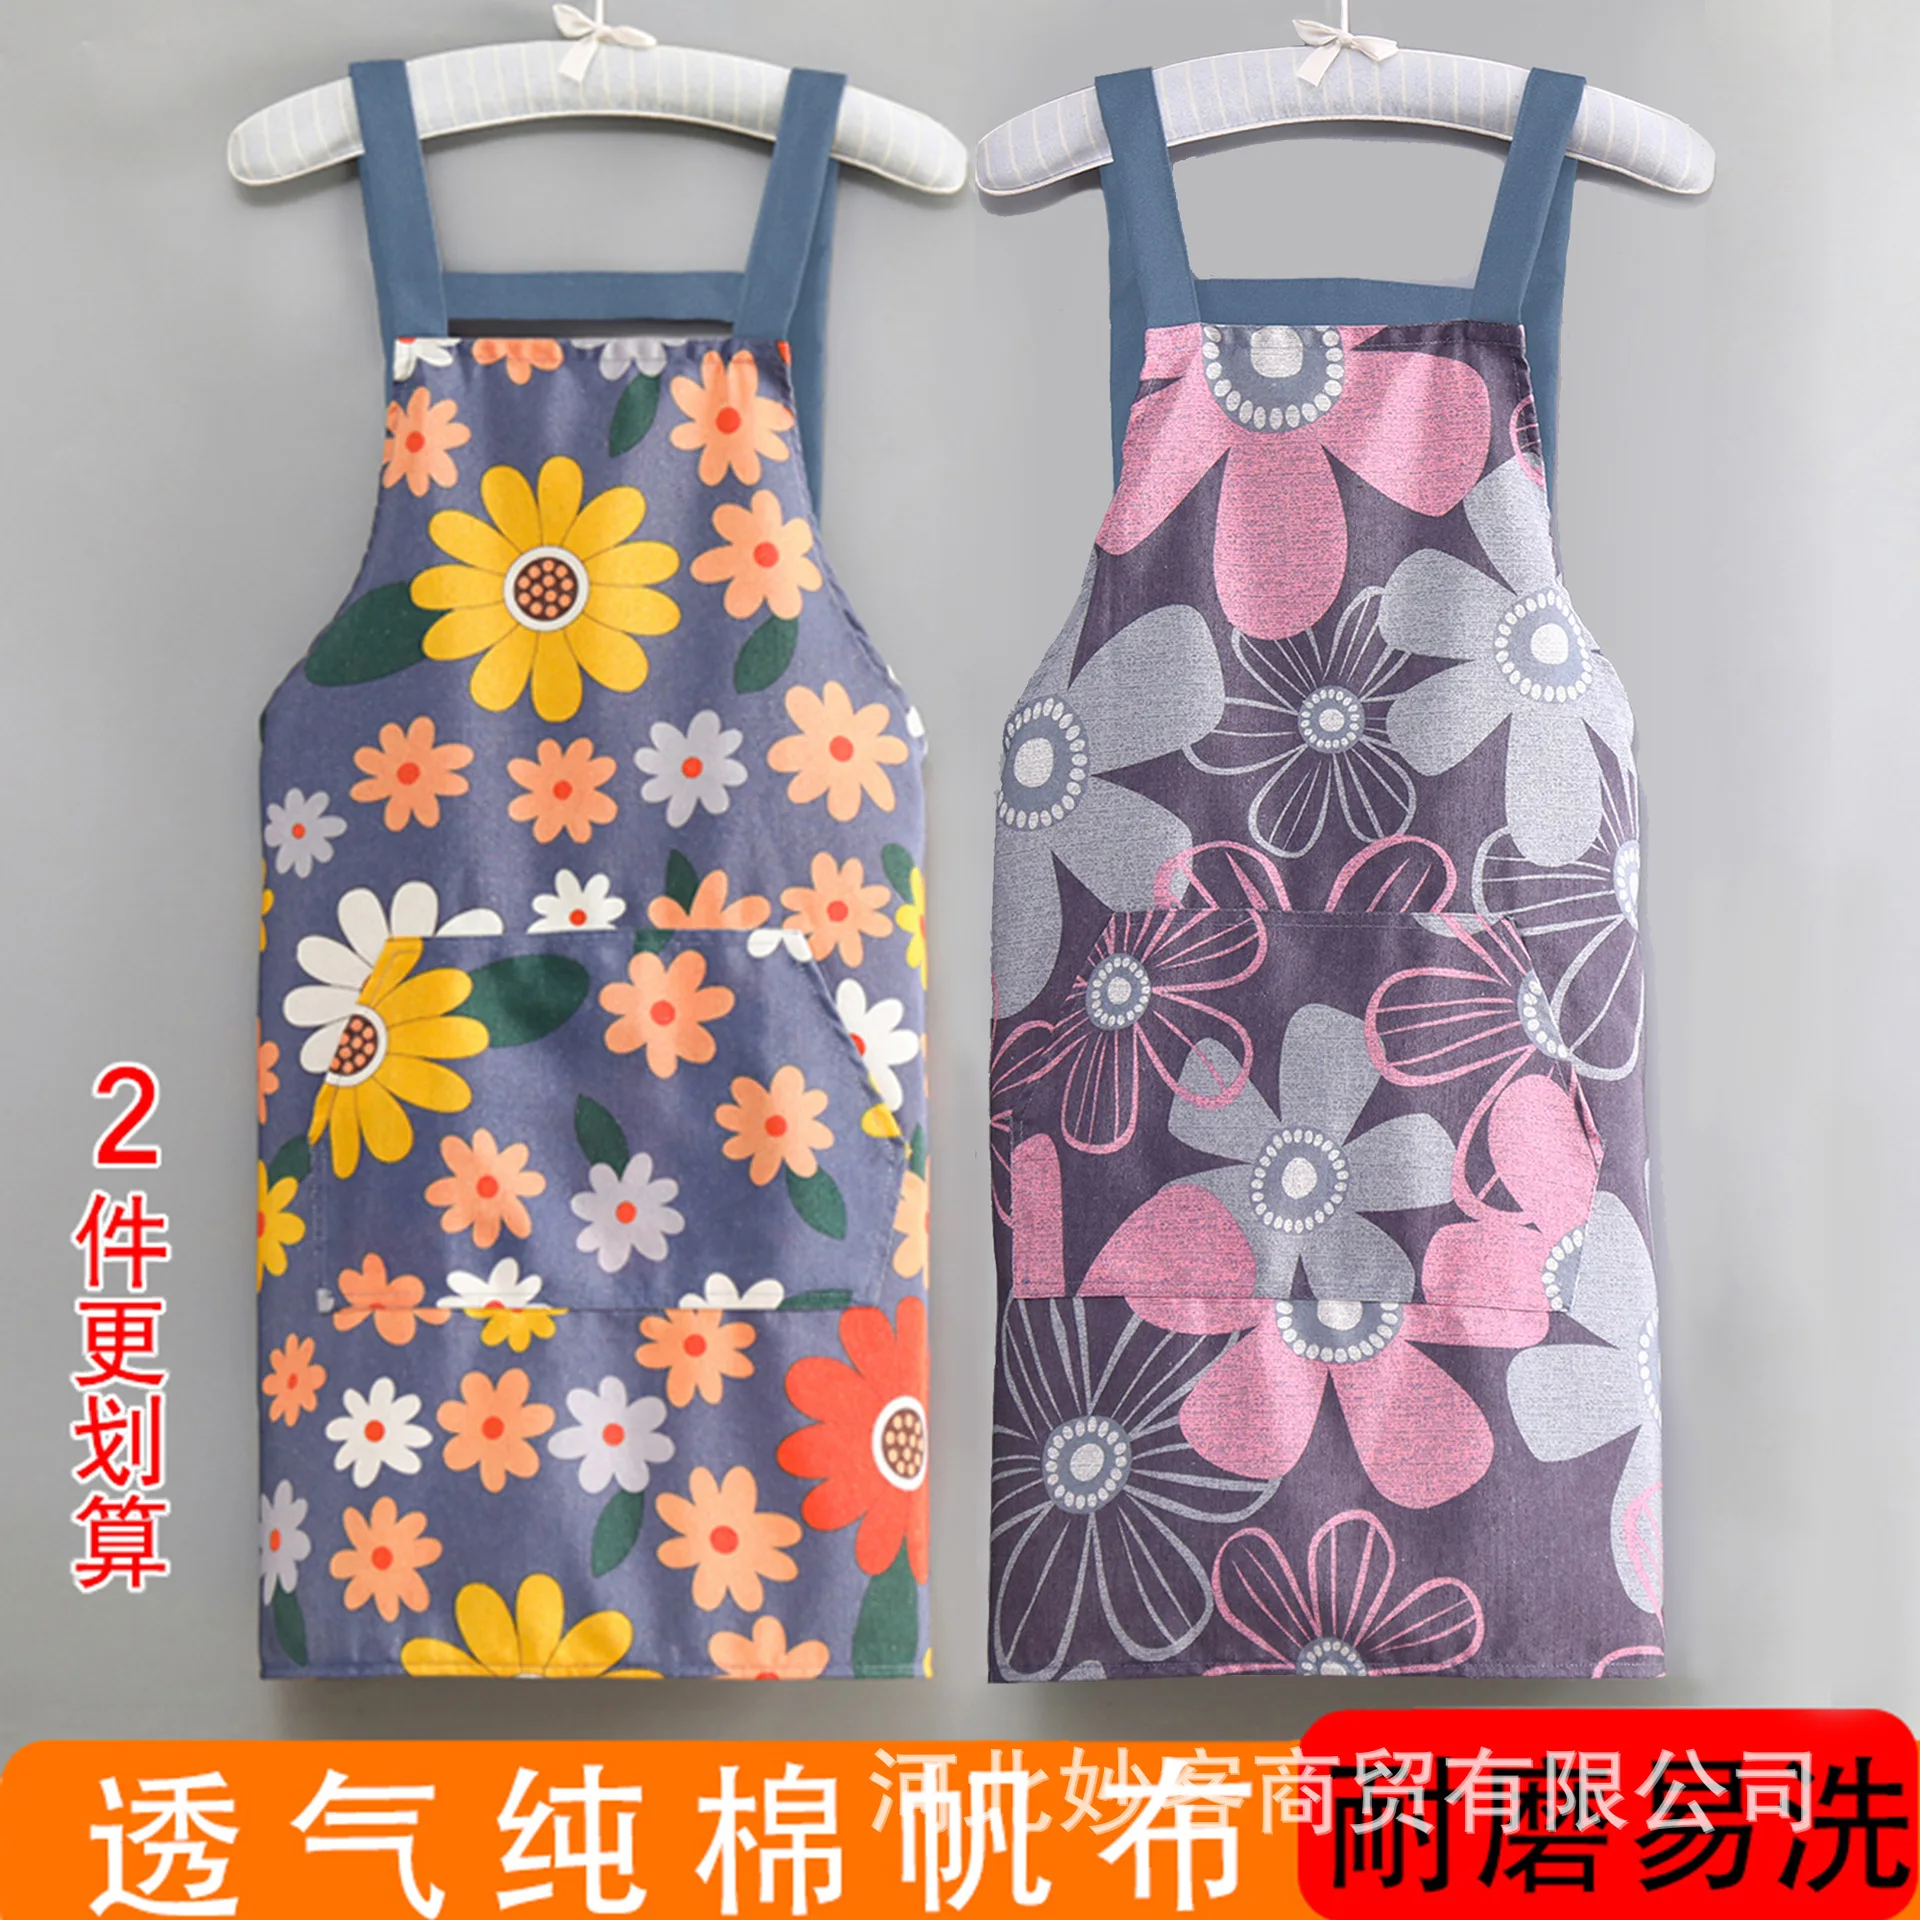 New fashion denim breathable canvas apron home fashion men and women oil resistant wear resistant work cooking waist